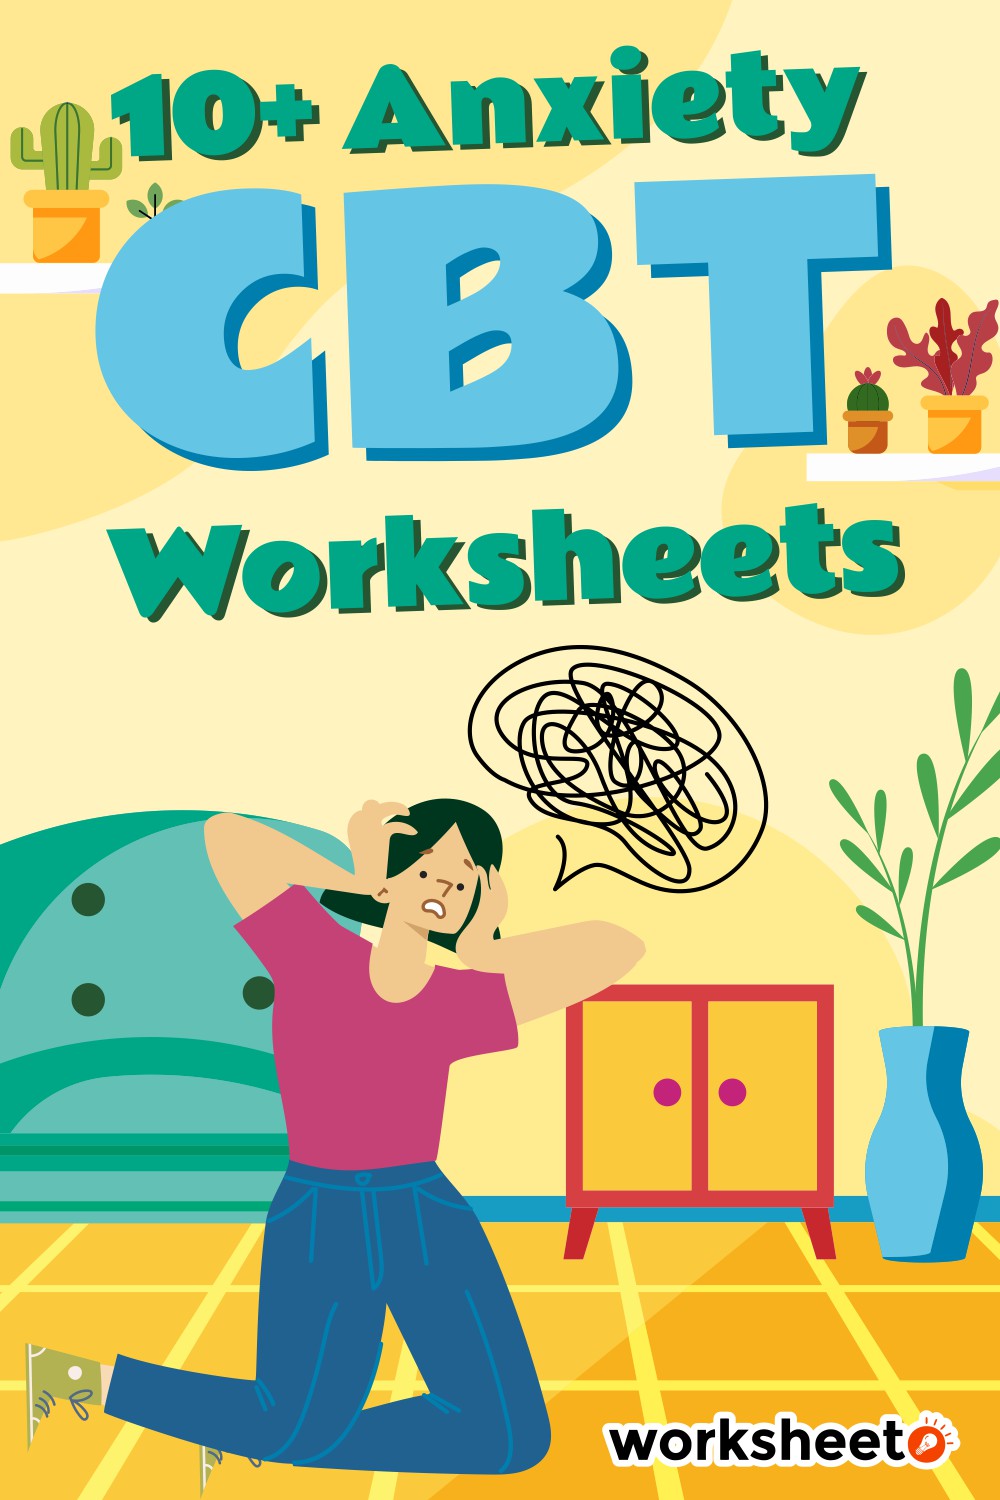 Anxiety CBT Worksheets